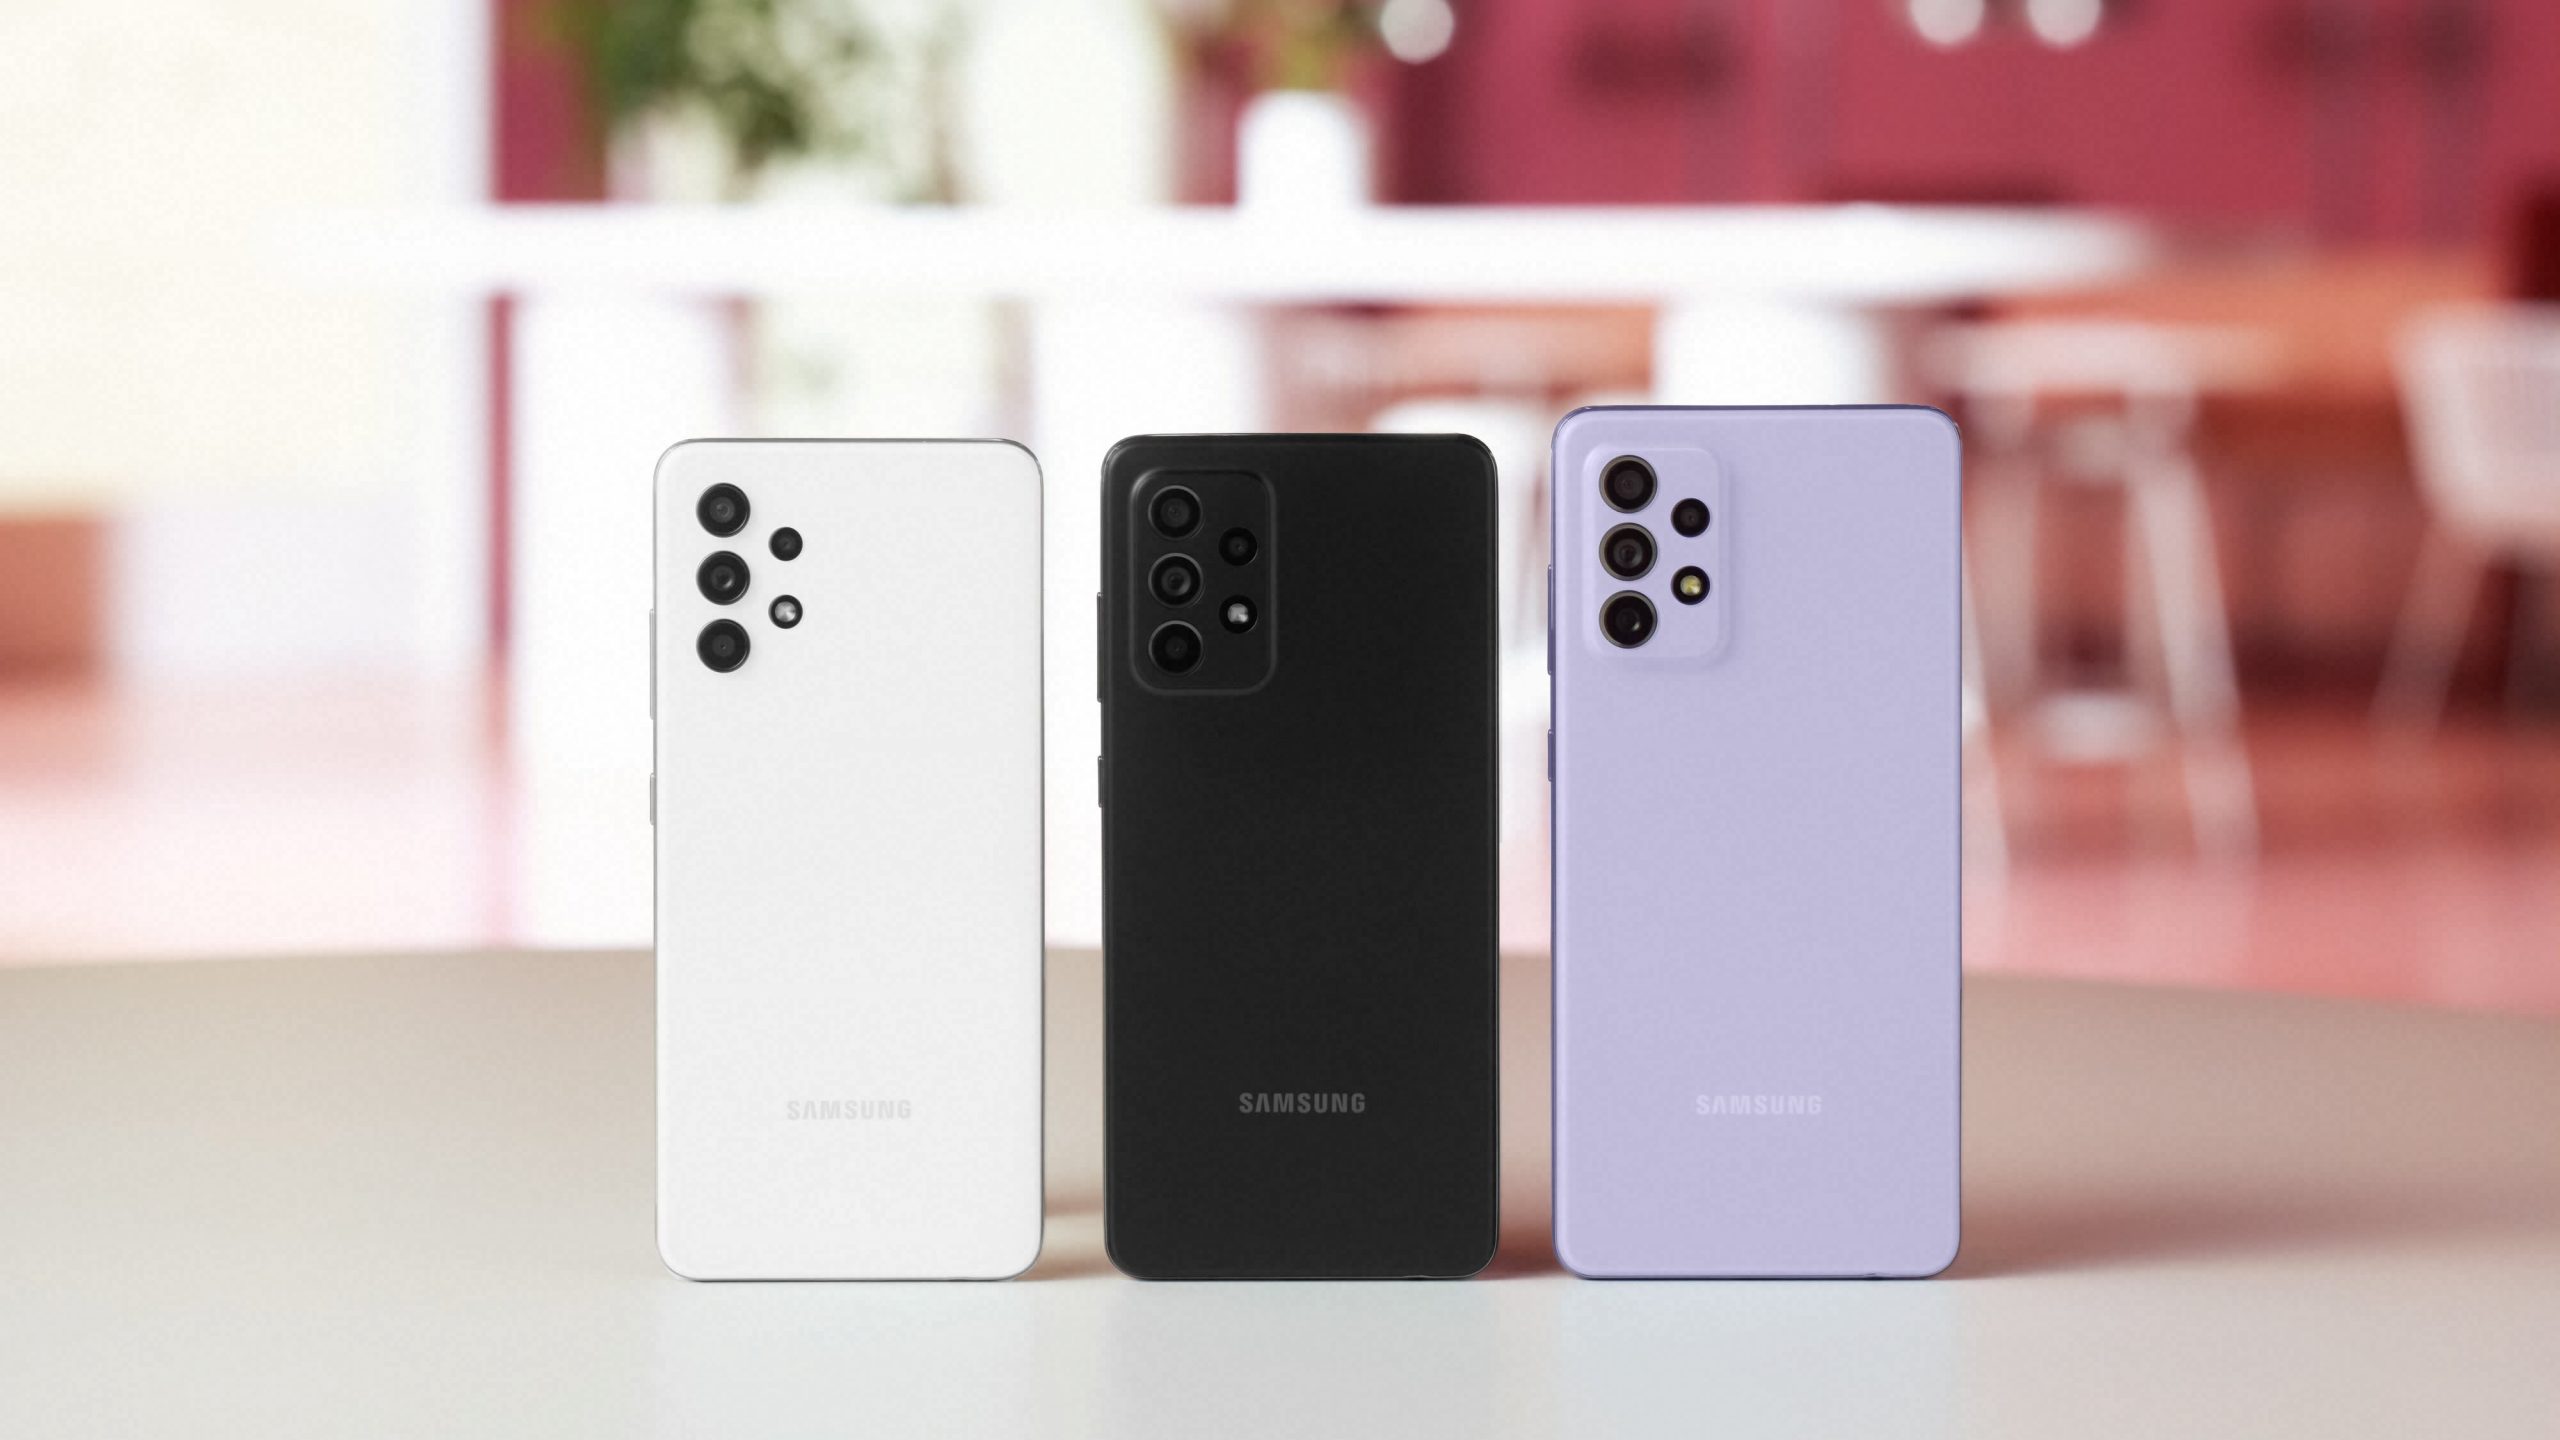 Samsung launches new budget smartphones to take on Apple as 5G rivalry heats up